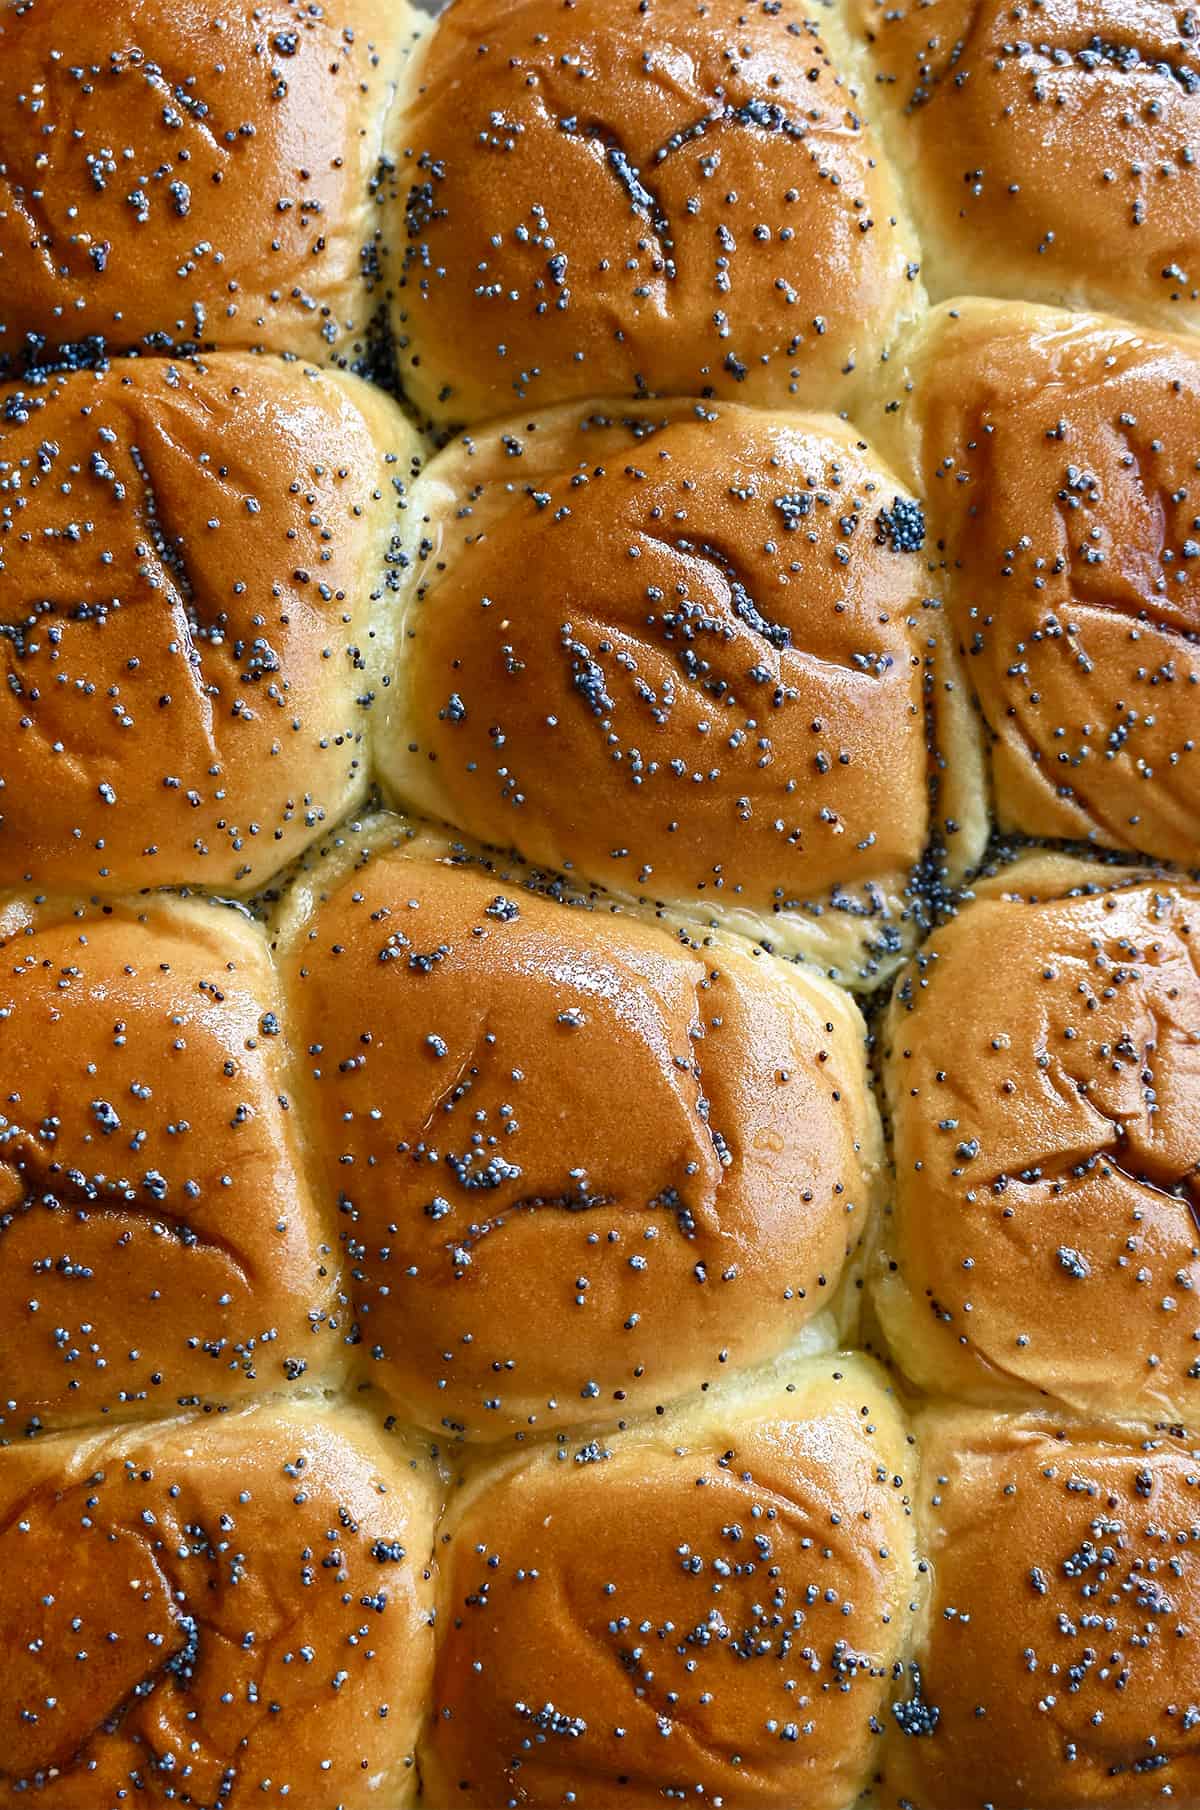 Hawaiian rolls topped with poppy seeds.